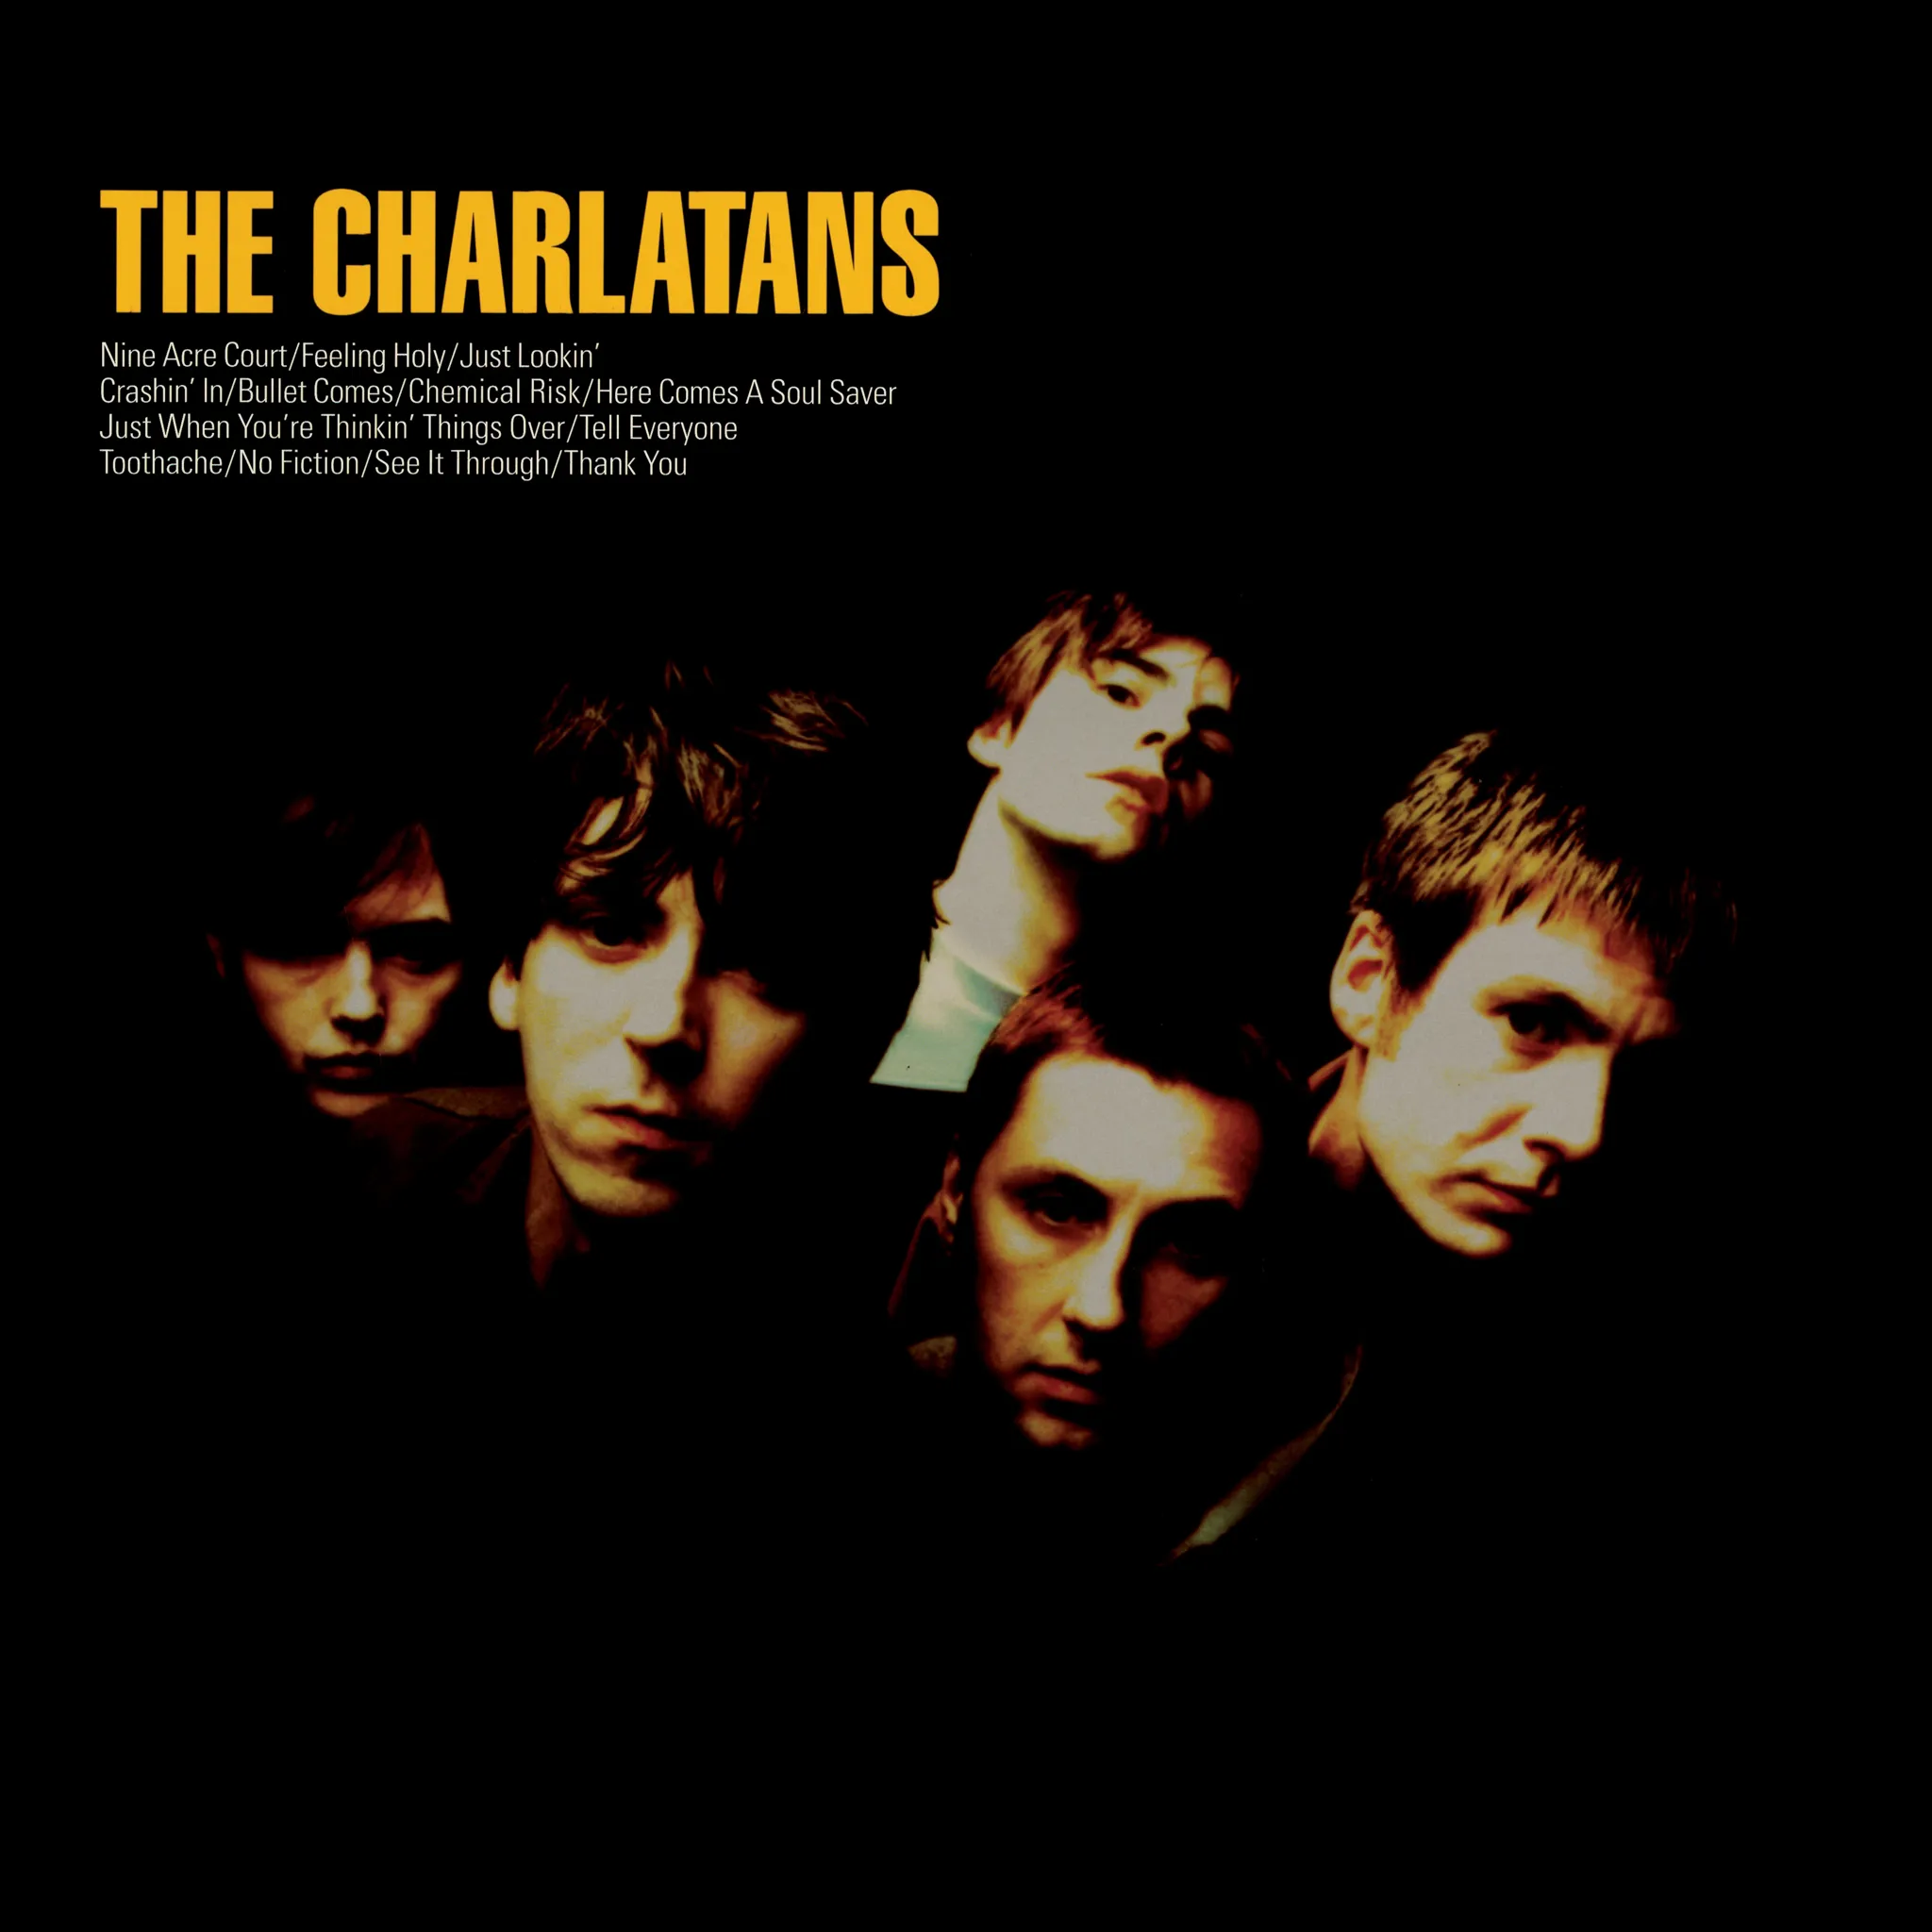 <strong>The Charlatans - The Charlatans</strong> (Vinyl LP - yellow)